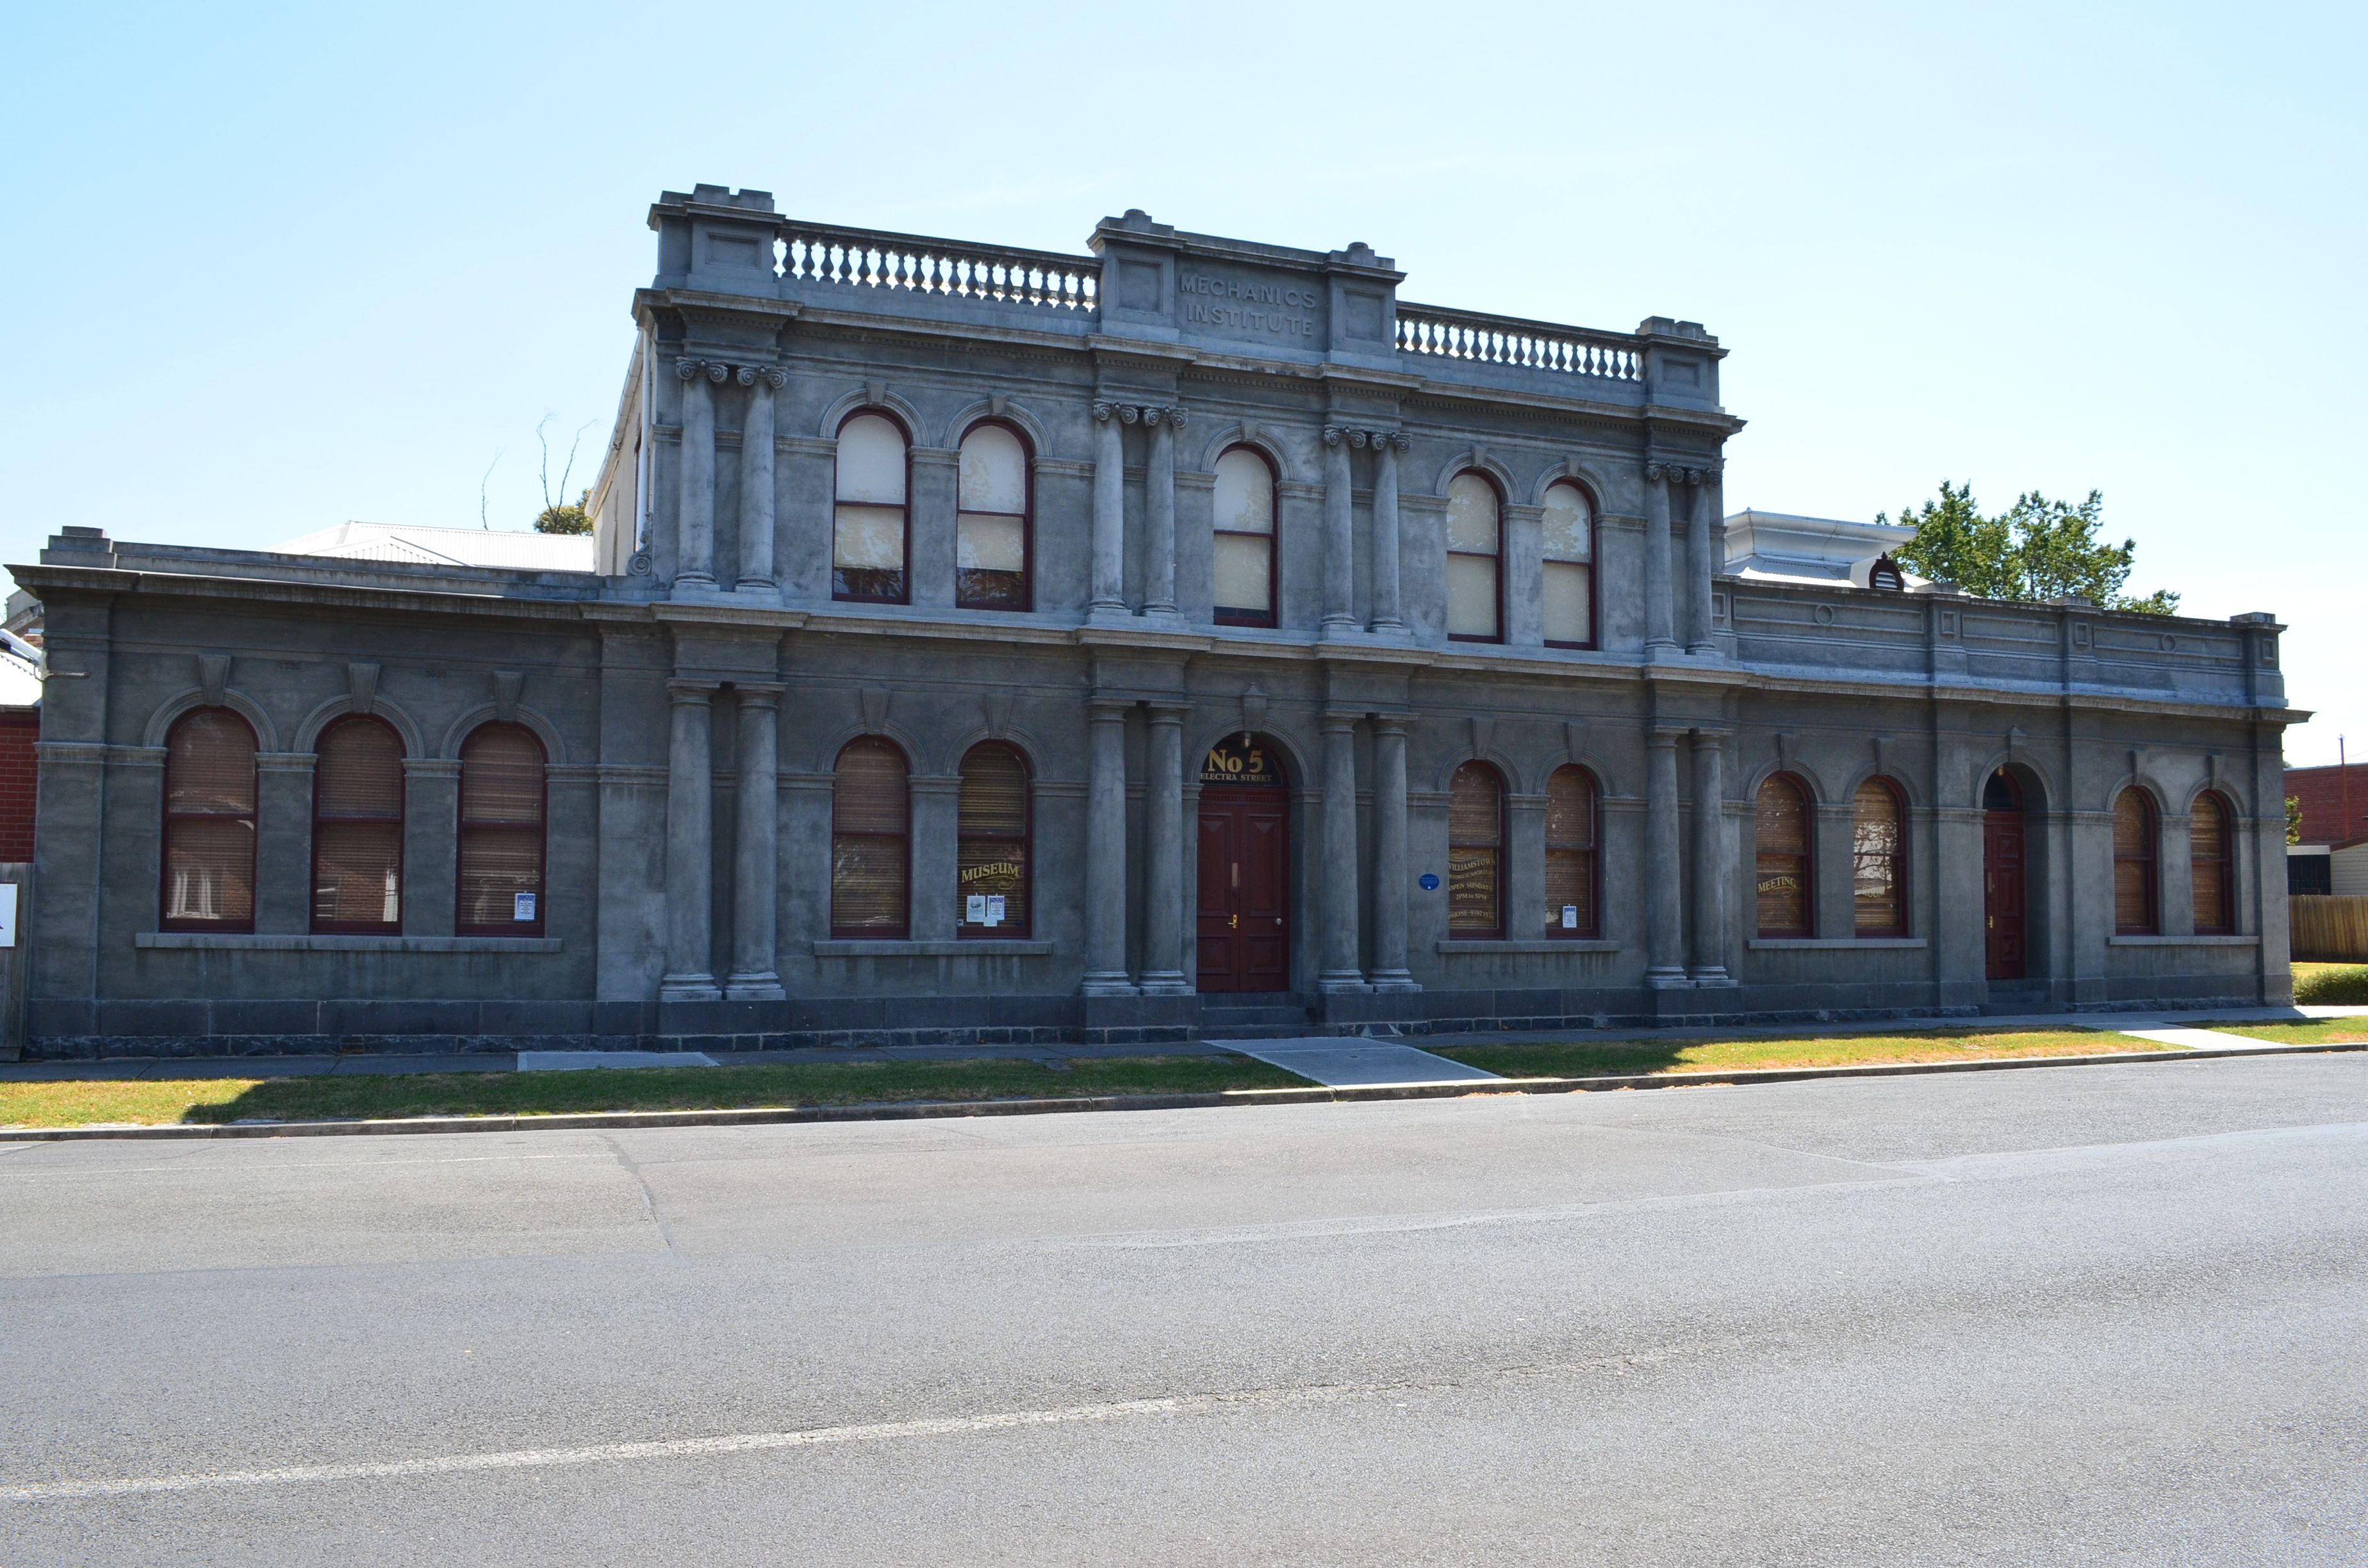 Williamstown historical museum image 1 (A2342083).jpg